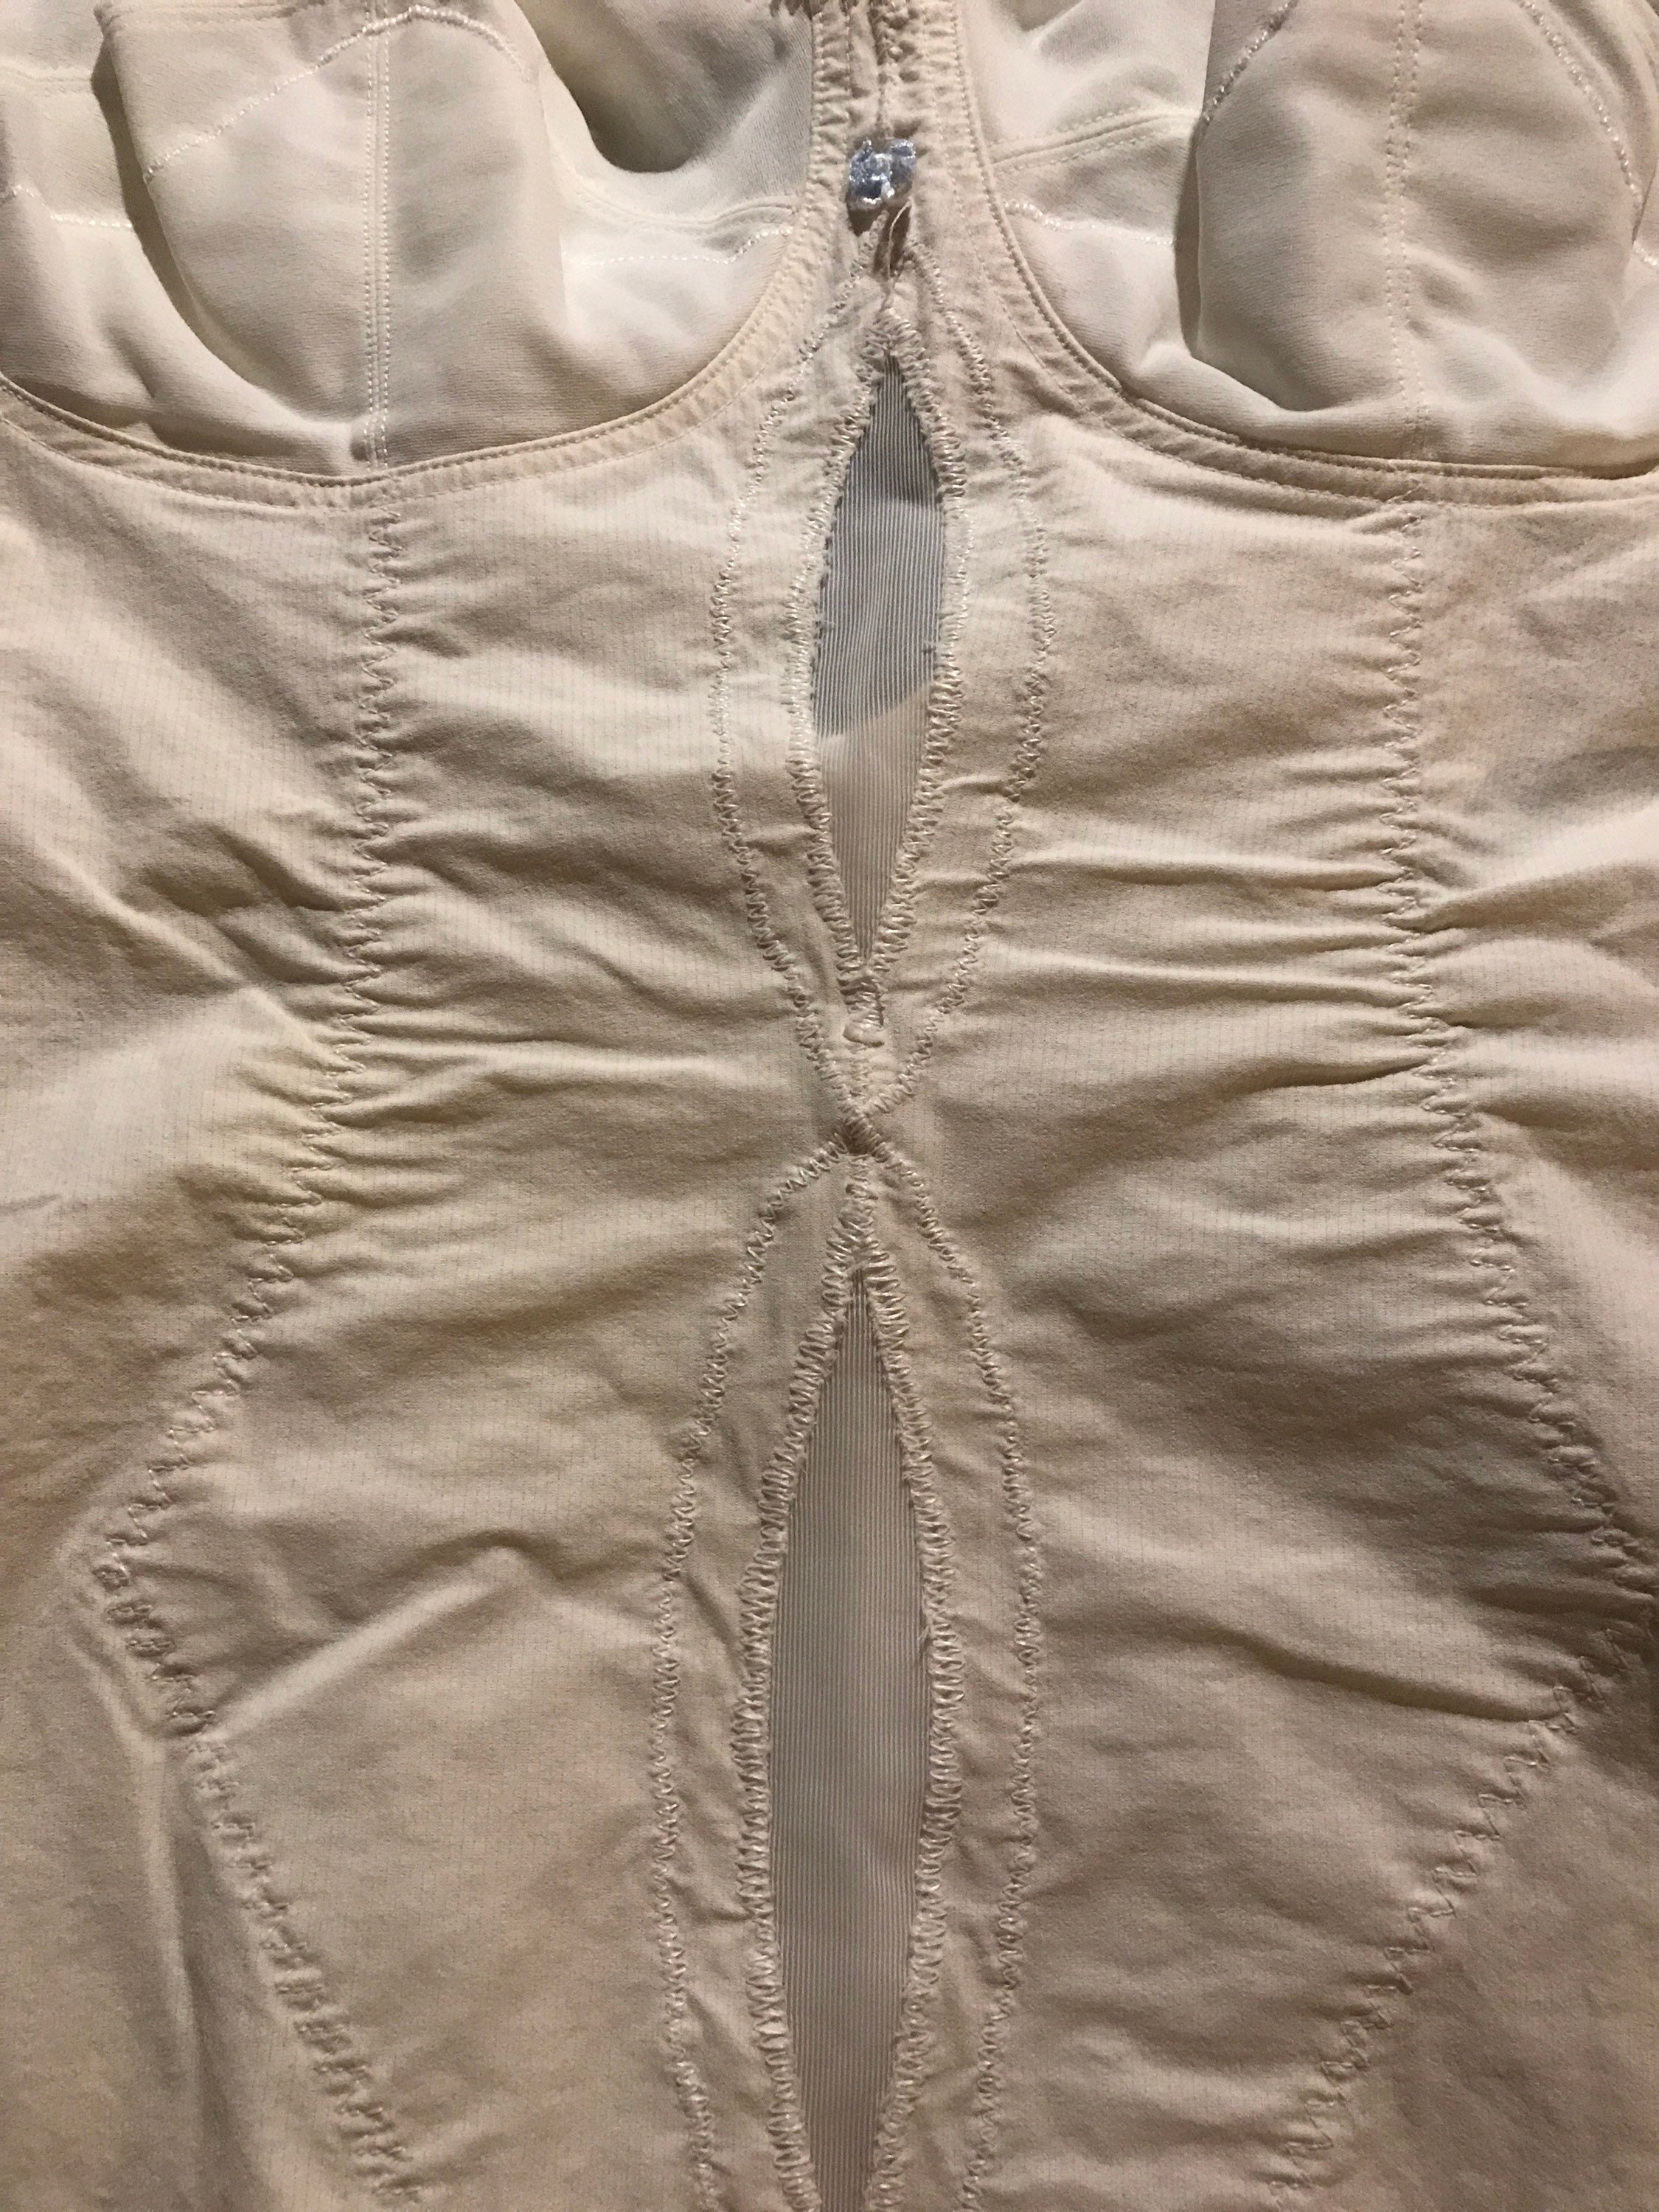 Vintage 1950’s Playtex “I Cant Believe It’s A Girdle” White Bodysuit ...